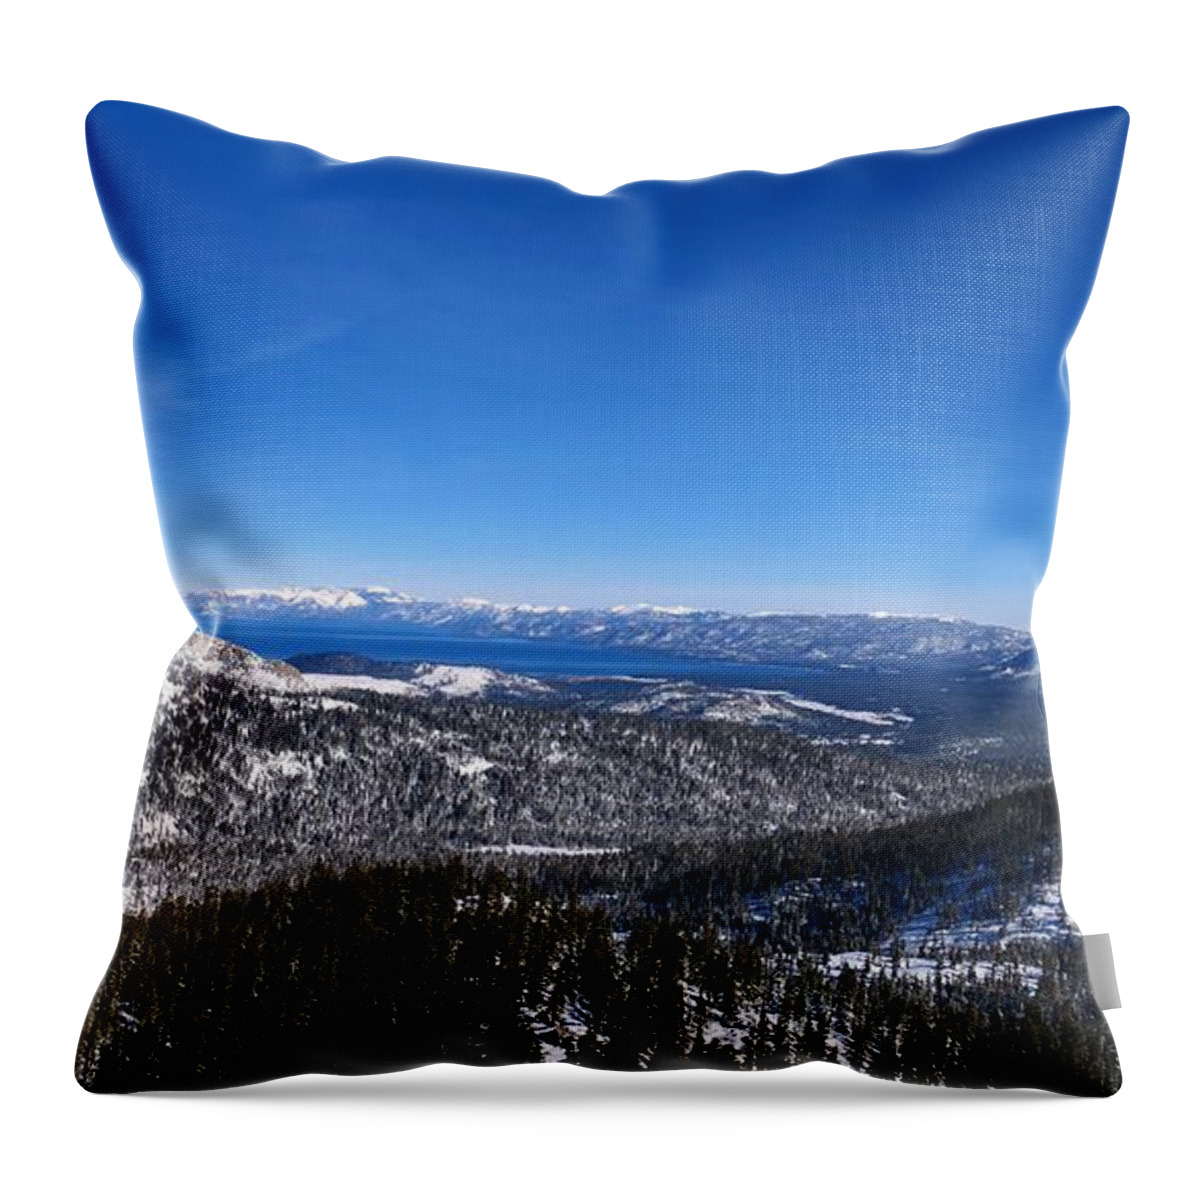 Lake Tahoe Throw Pillow featuring the photograph Lake Tahoe #2 by Alex King